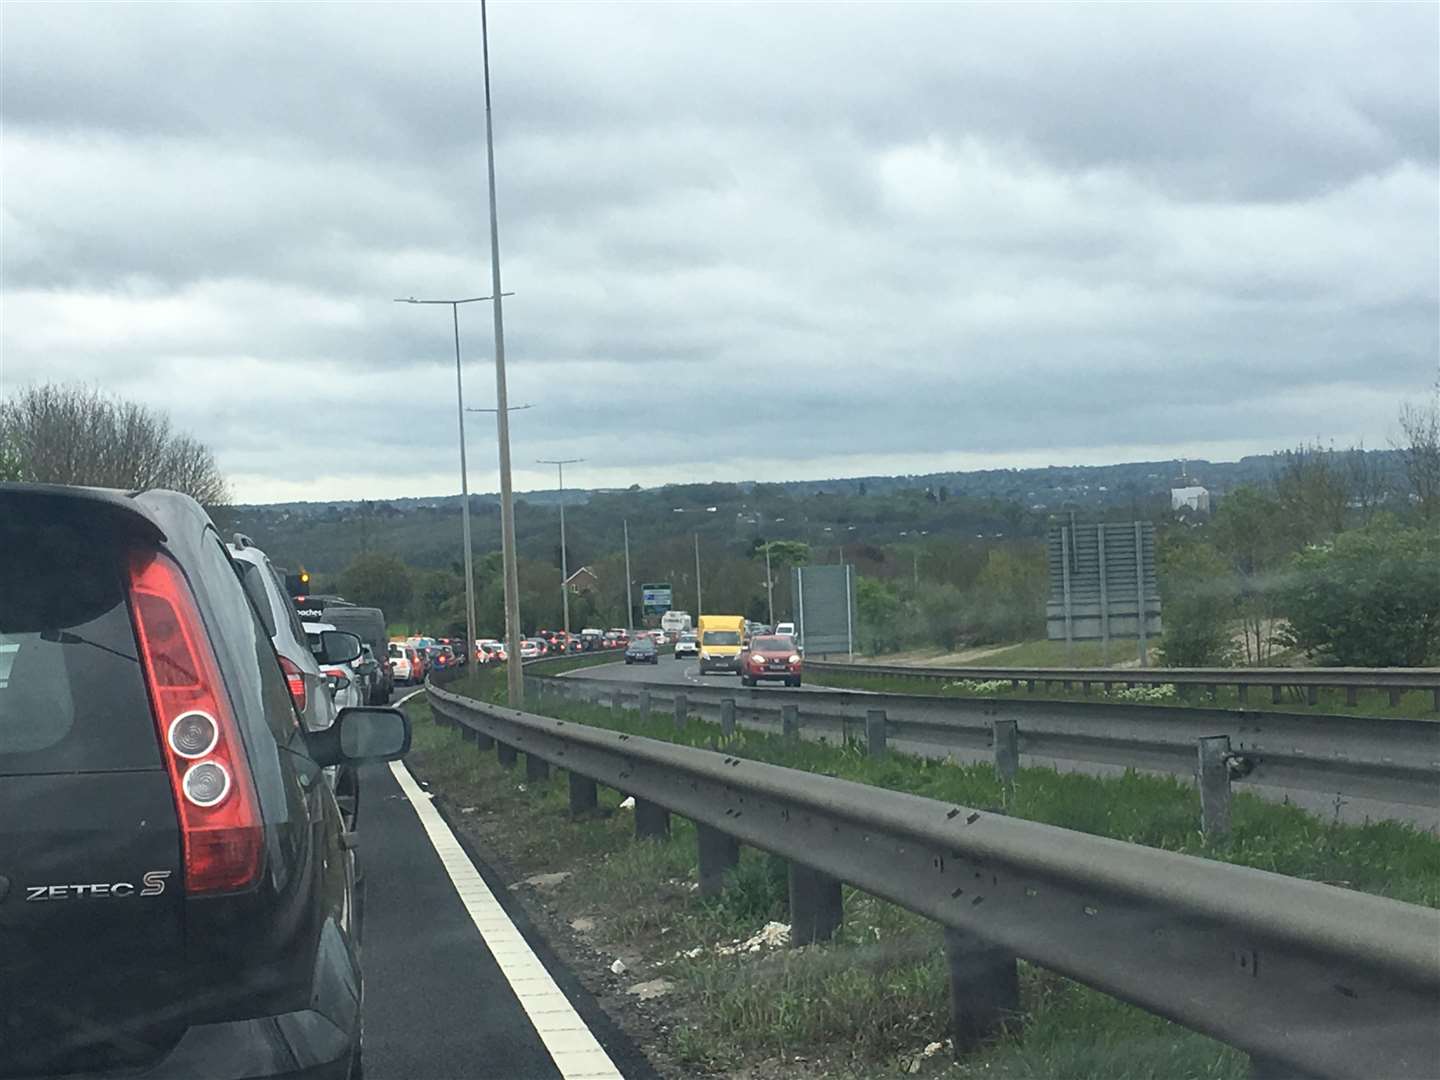 Drivers are stuck in slow moving traffic with only one lane open